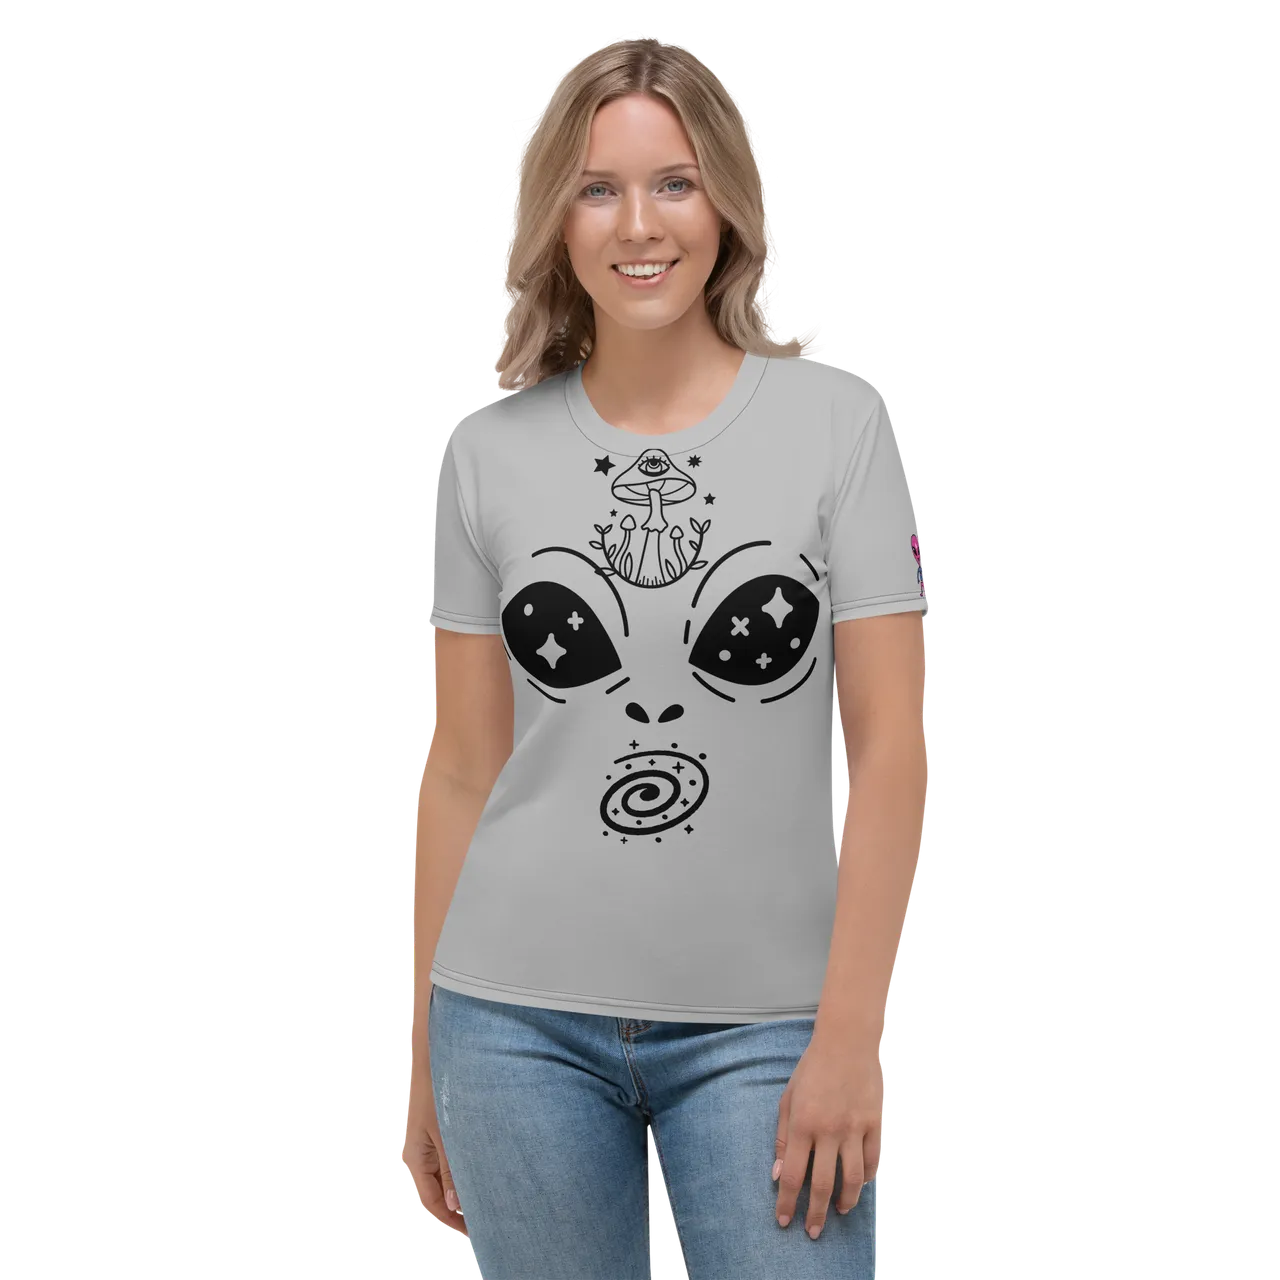 all-over-print-womens-crew-neck-t-shirt-white-front-63781f2920e9a.png